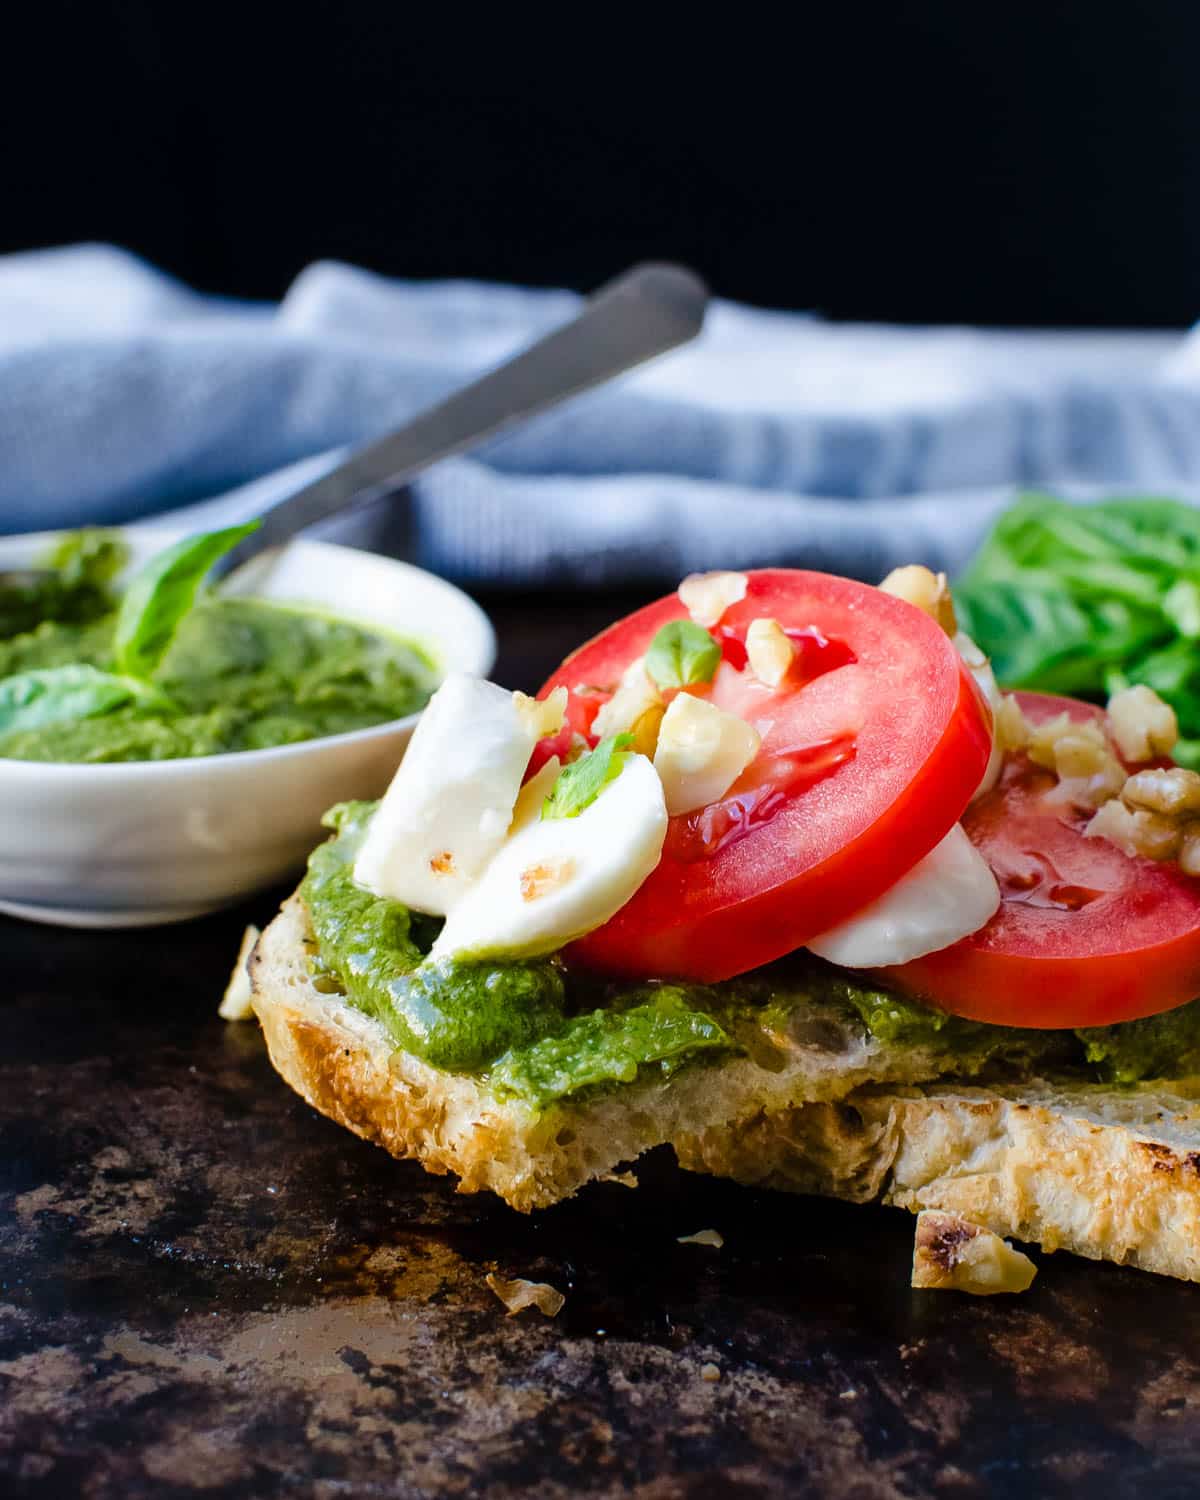 Serving walnut pesto on crostini with cheese and tomato.